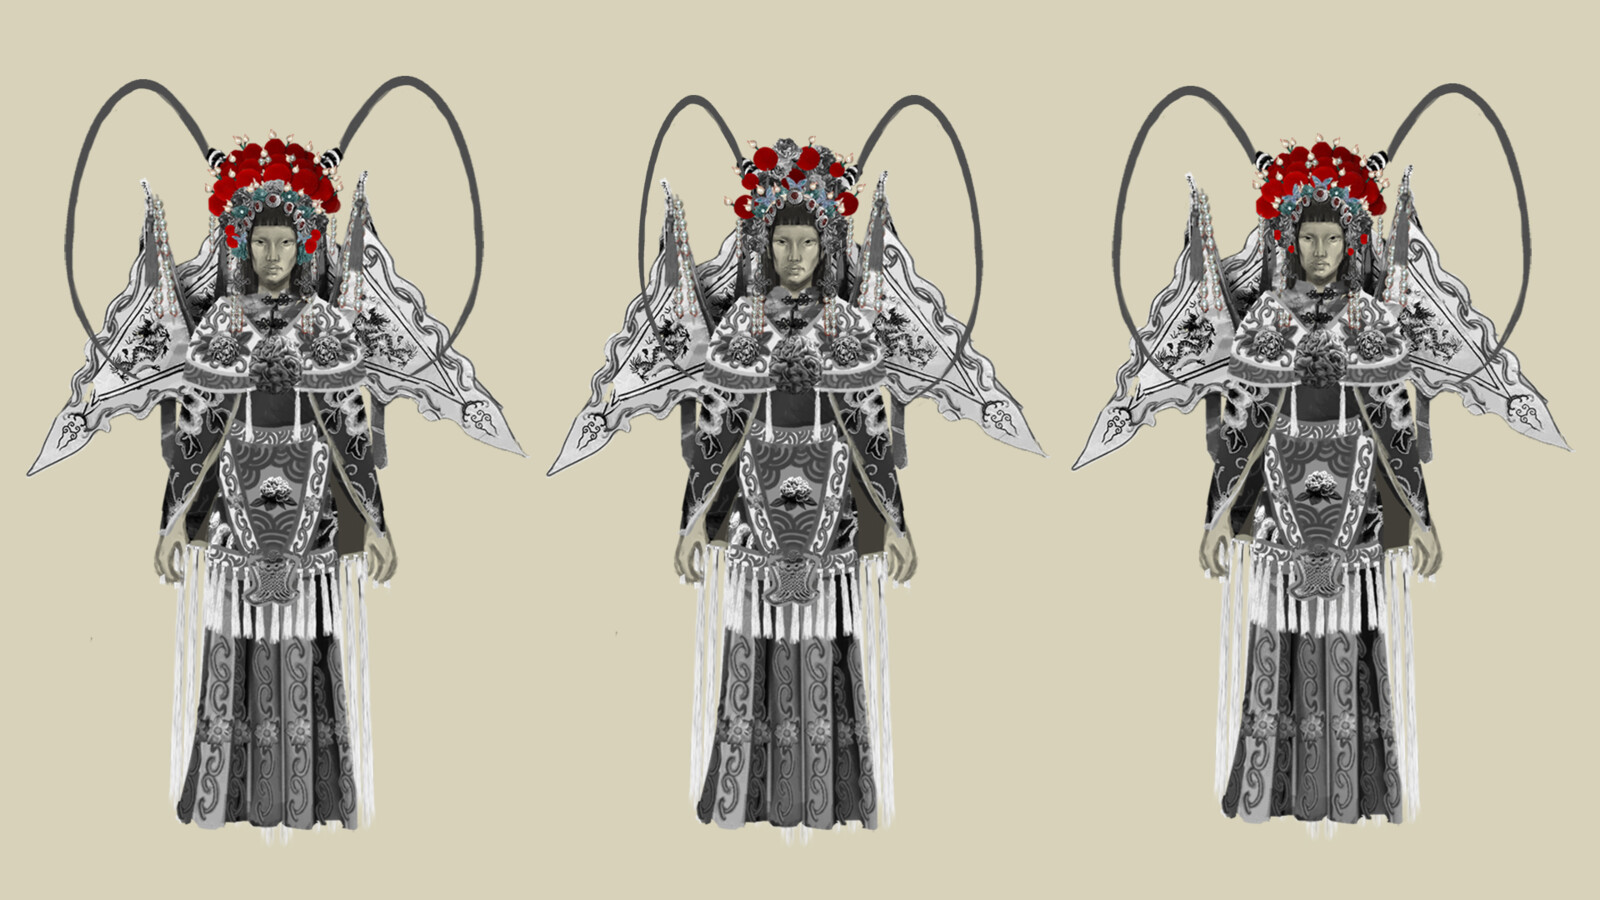 Combination of headdress design and final outfit design